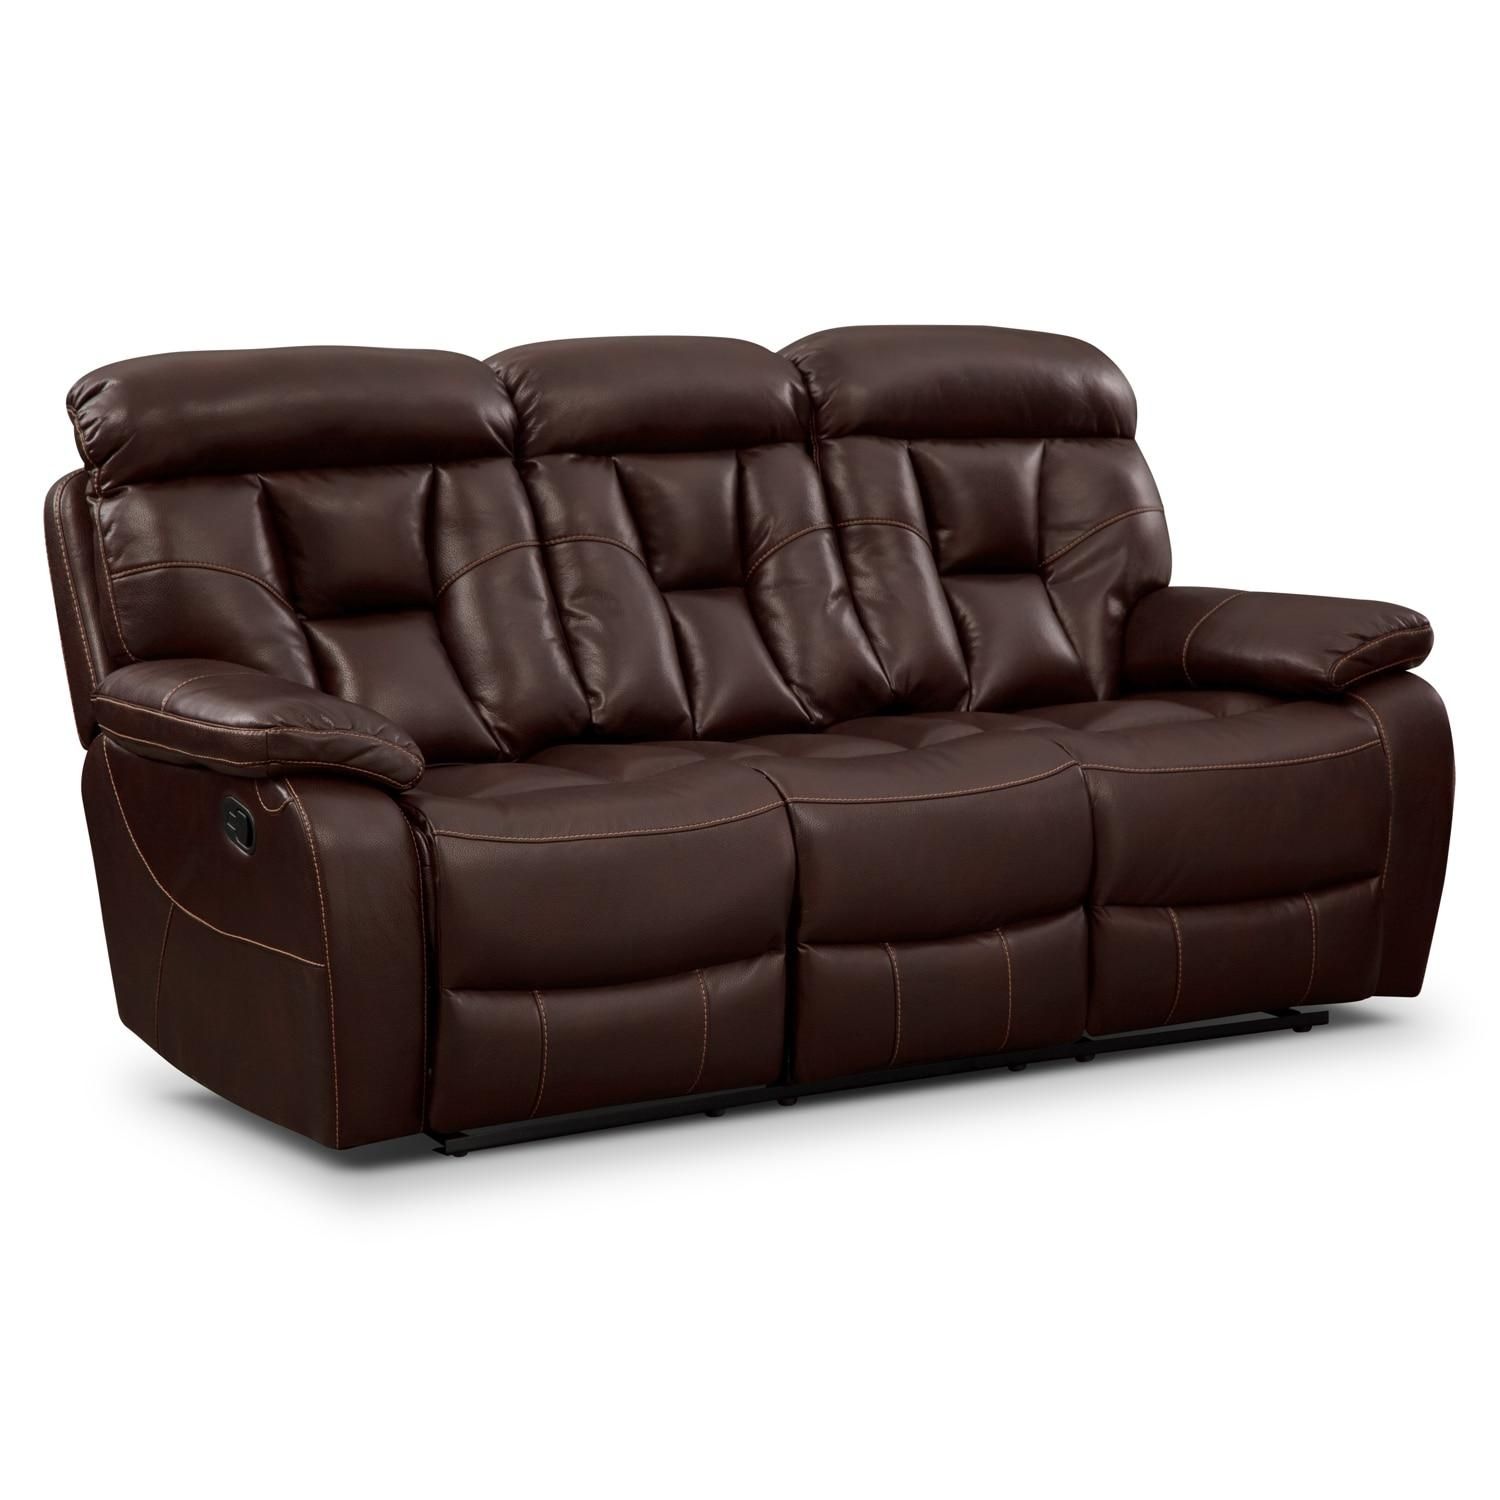 Sofas & Couches | Living Room Seating | Value City Furniture In Sofa Chair Recliner (Photo 18 of 20)